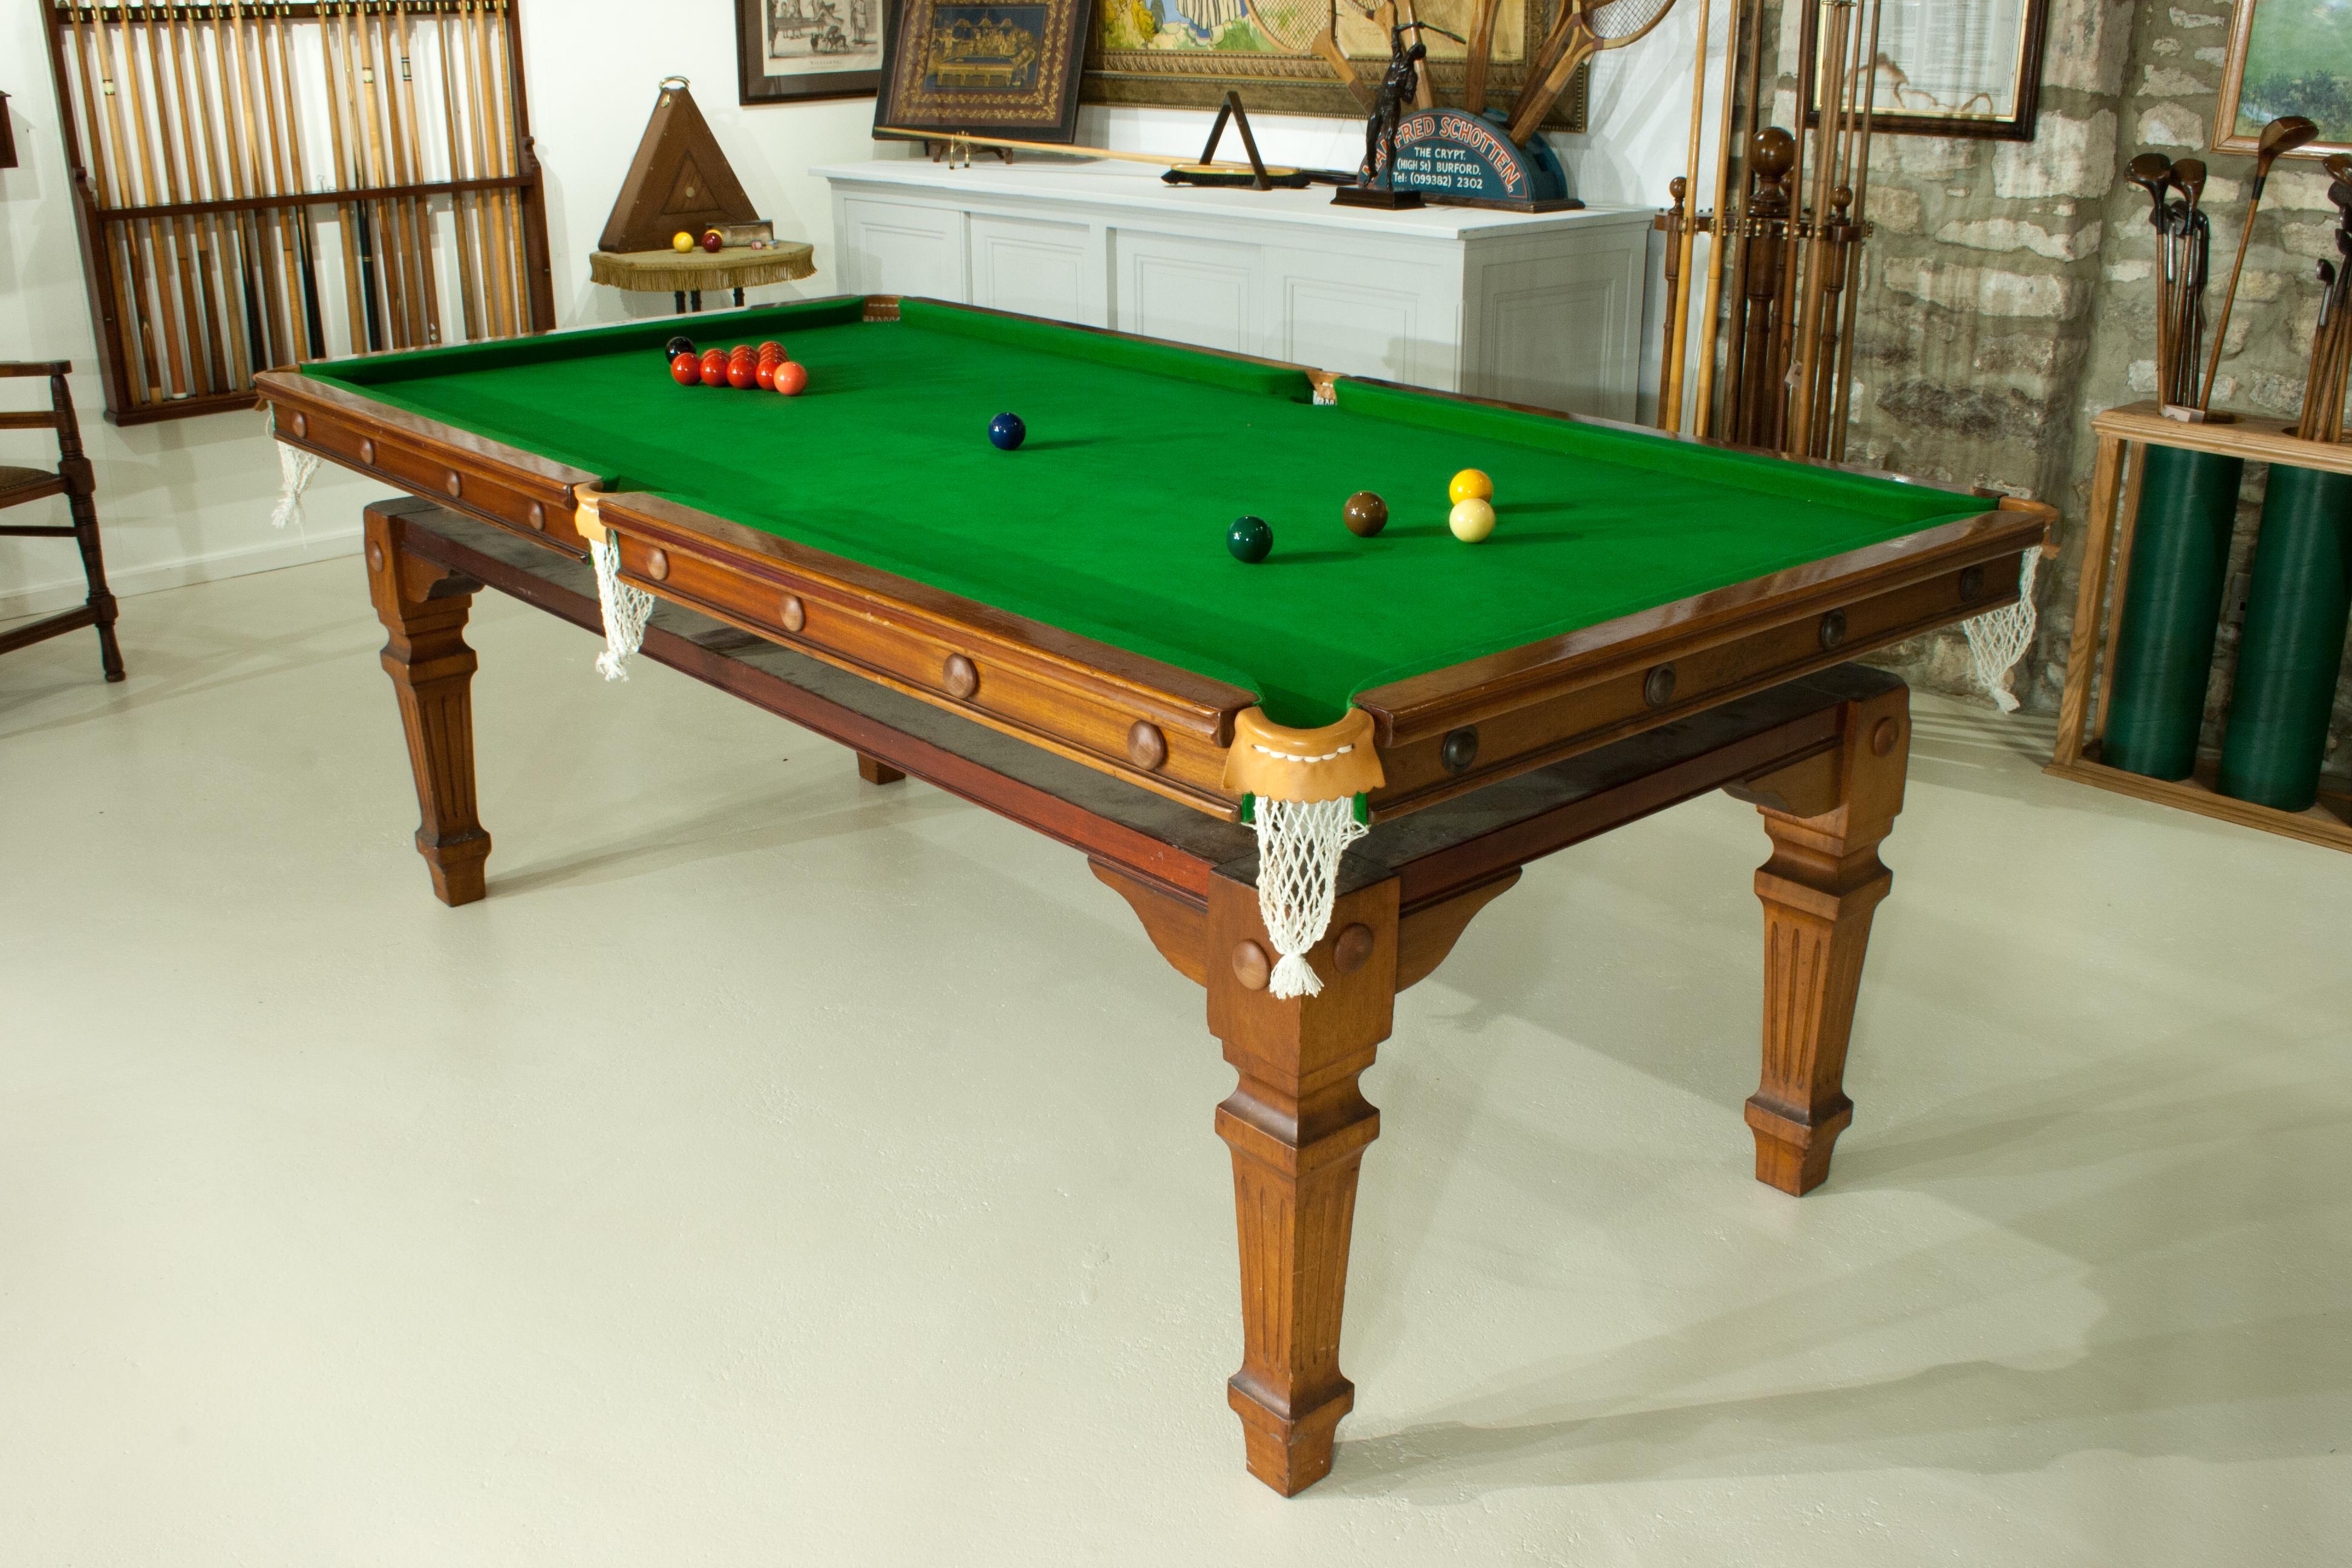 7ft Riley Snooker Billiard dining table
A fine quality early 20th century mahogany dining snooker, billiard, pool table by E. J. Riley Ltd., of Accrington. The Dual height billiard dining table has good shaped and fluted square section legs and